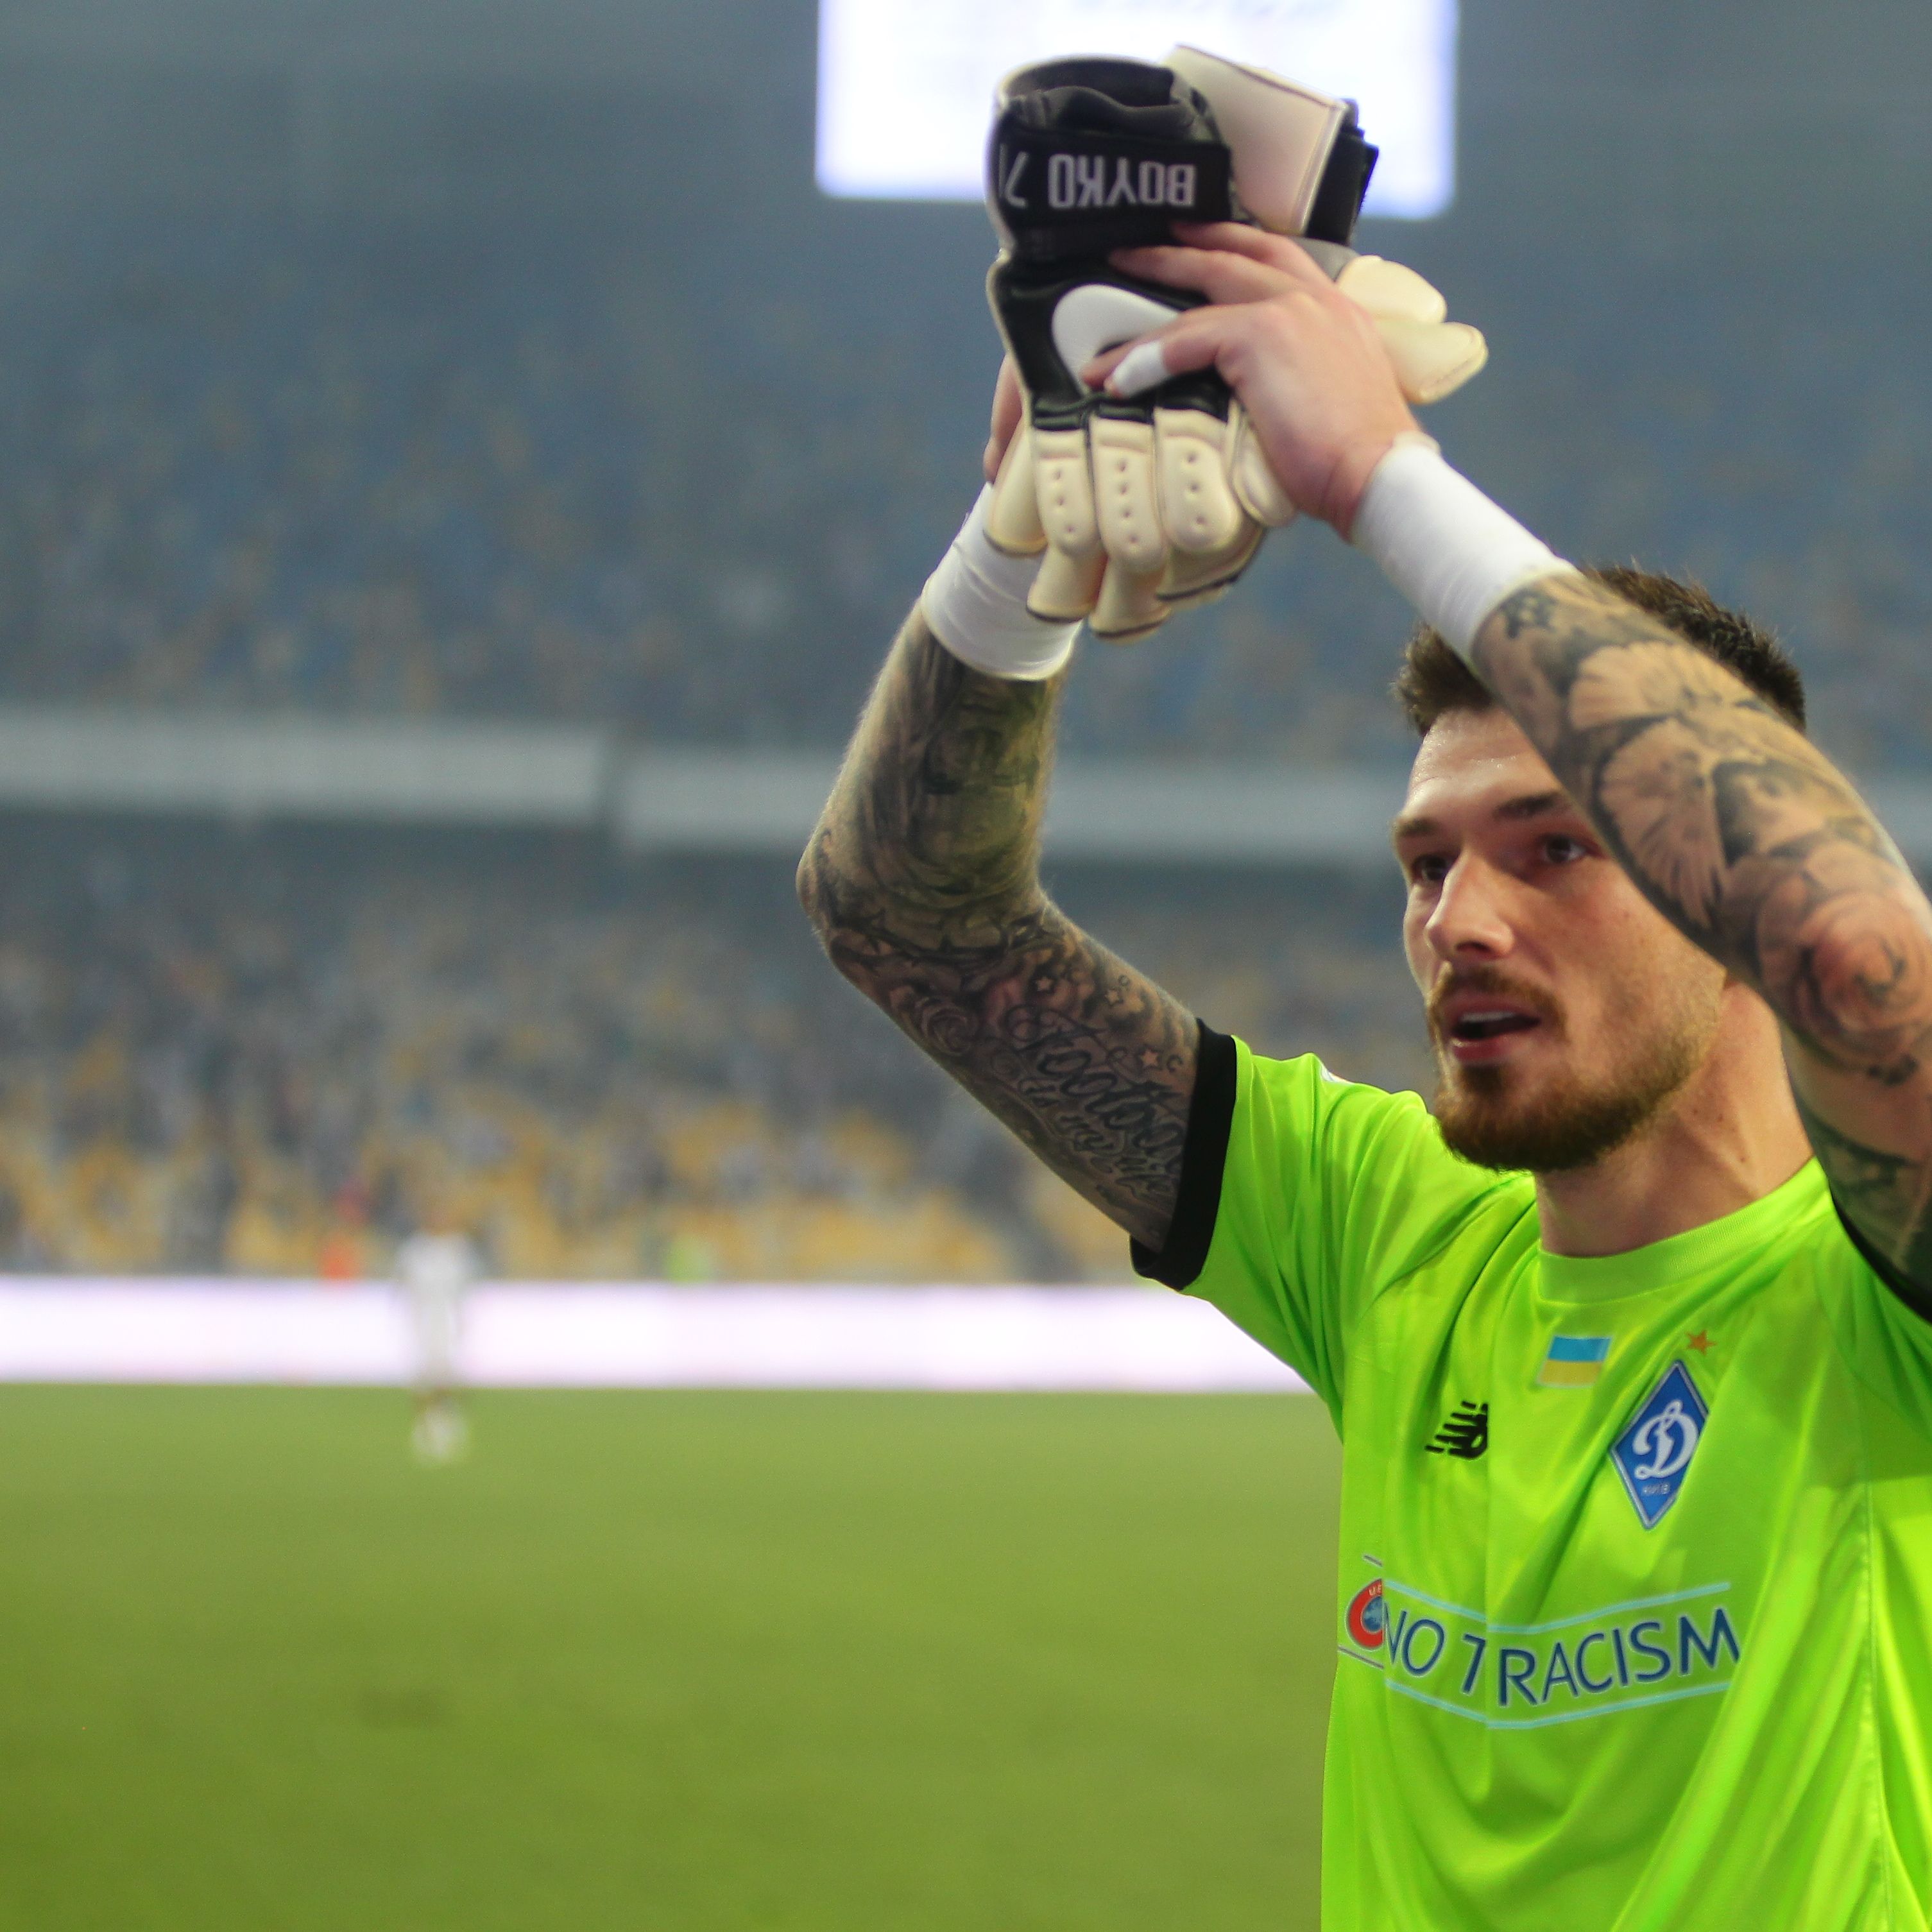 Denys Boiko: “I like games with a lot of chances, when goalkeeper is constantly in play”